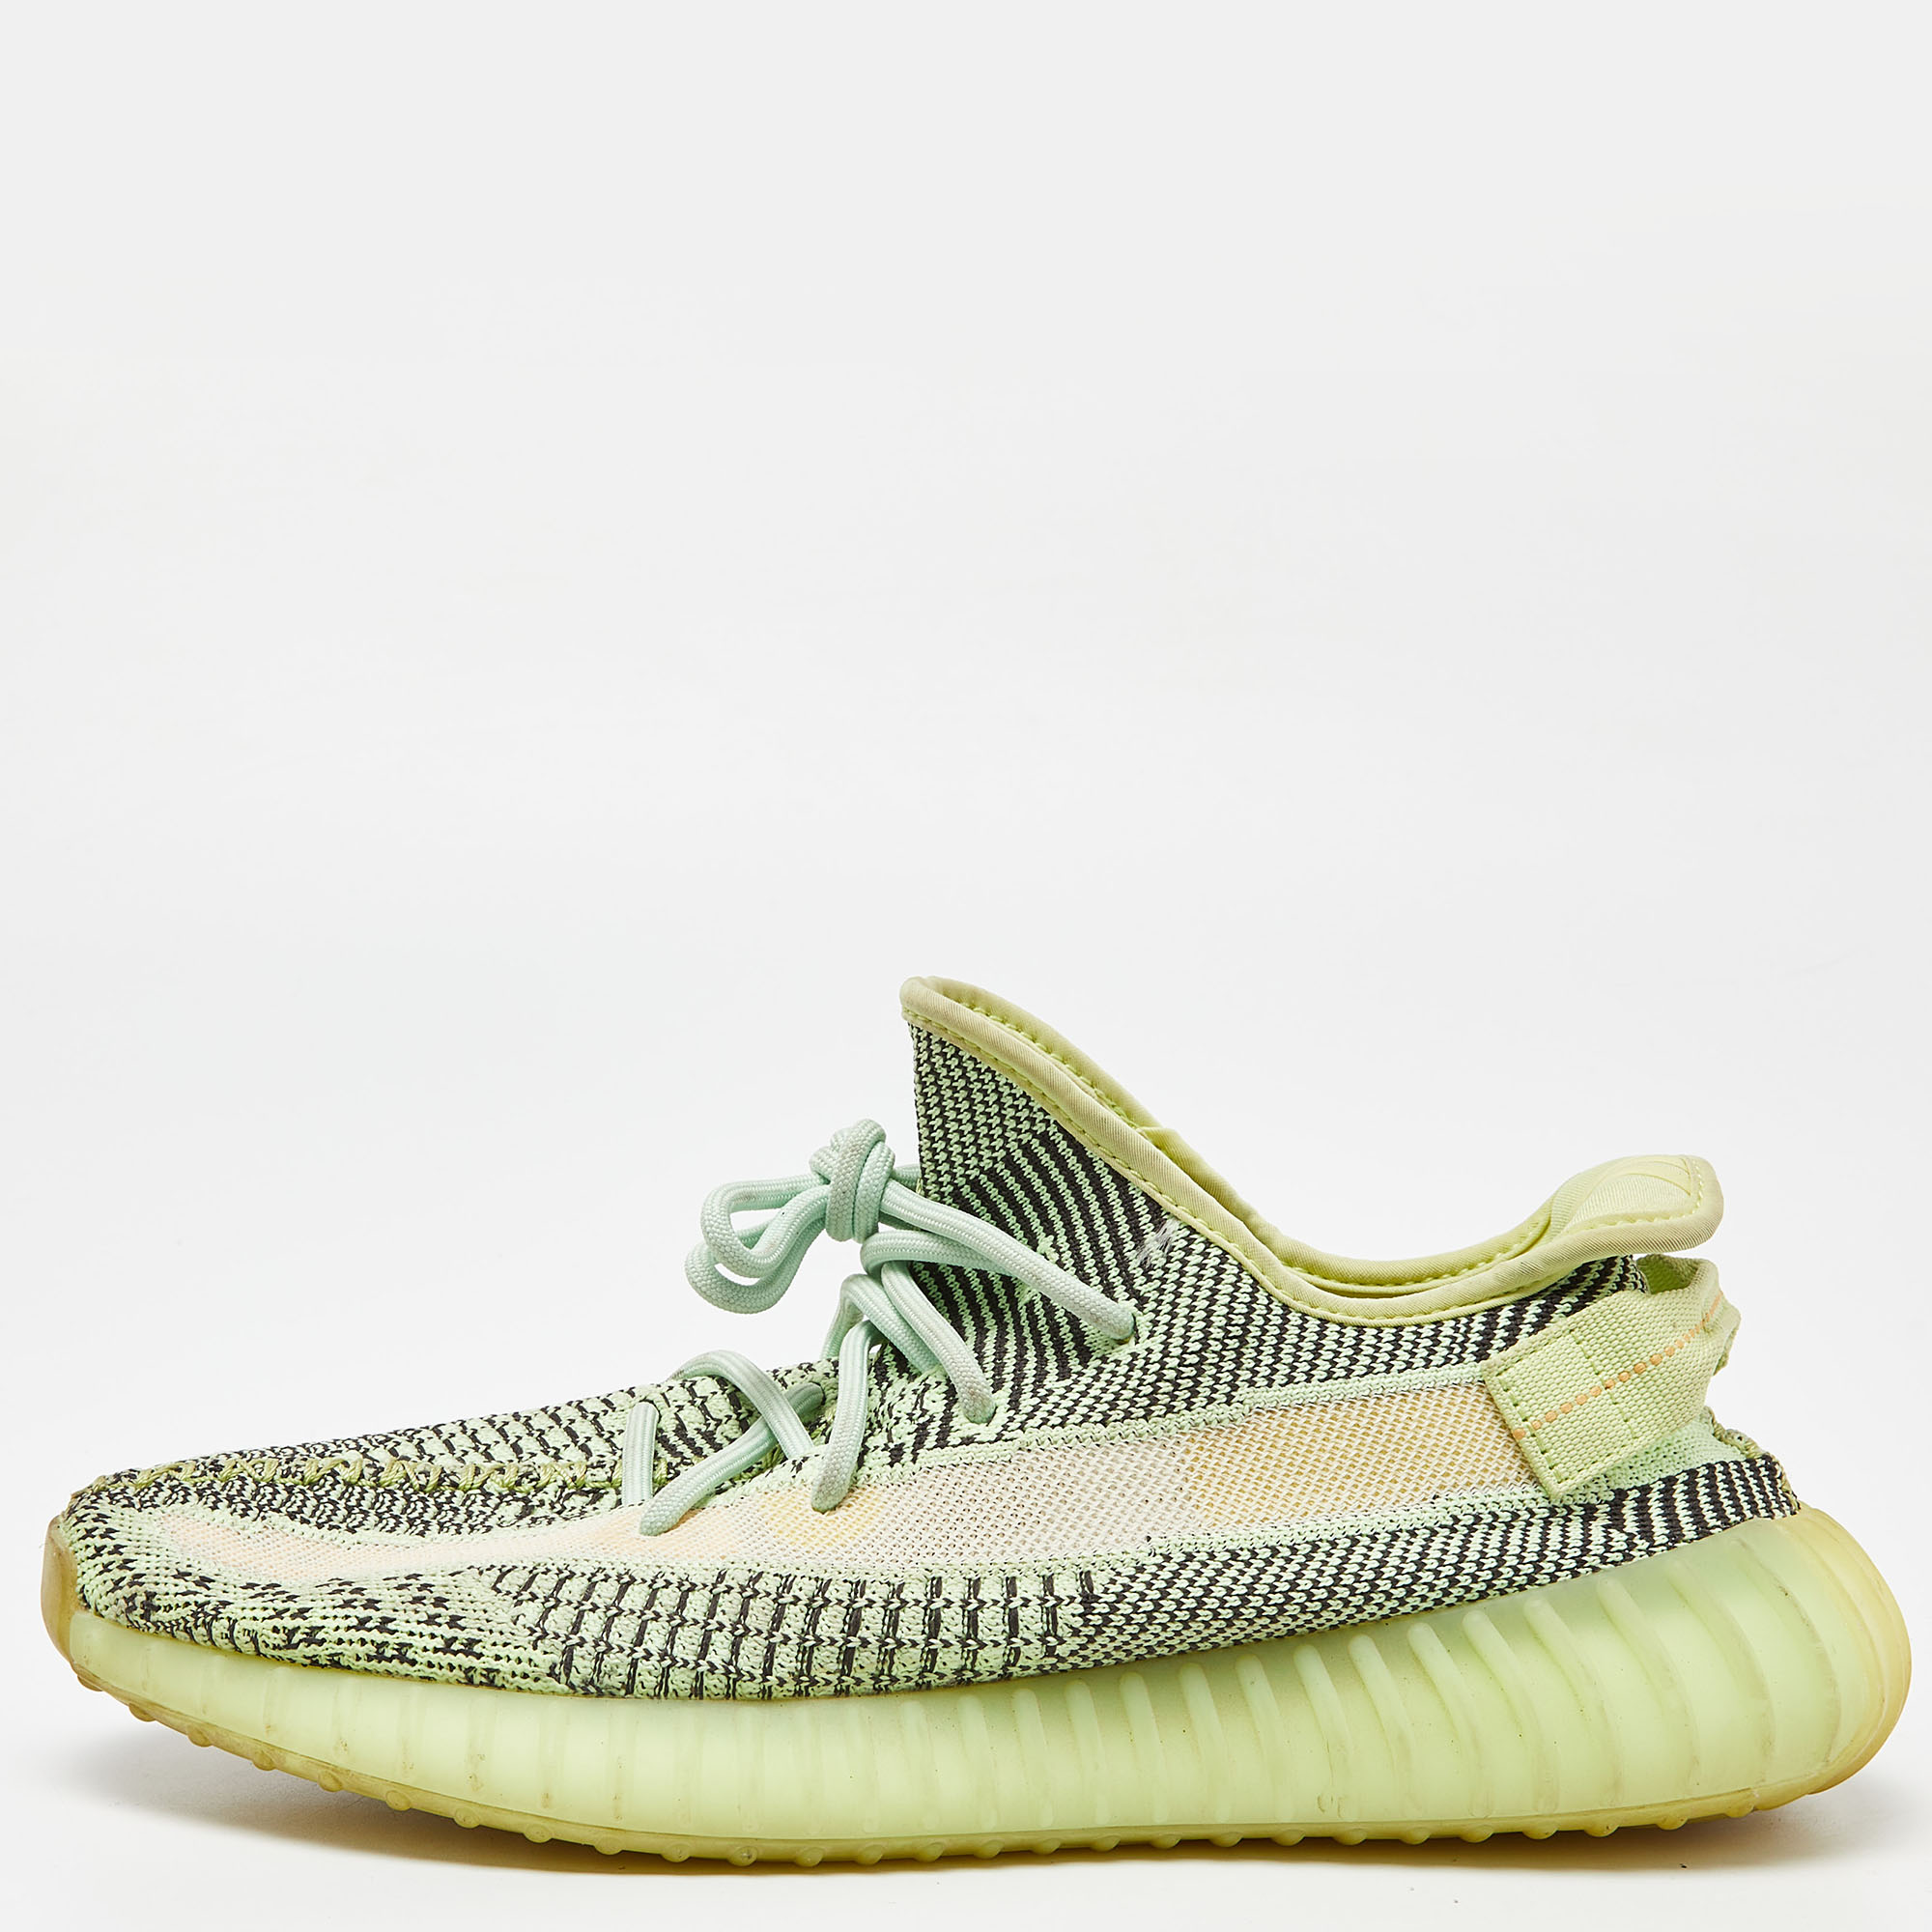 Pre-owned Yeezy X Adidas Green Knit Fabric Boost 350 V2 Yeezreel Non-reflective Sneakers Size 44